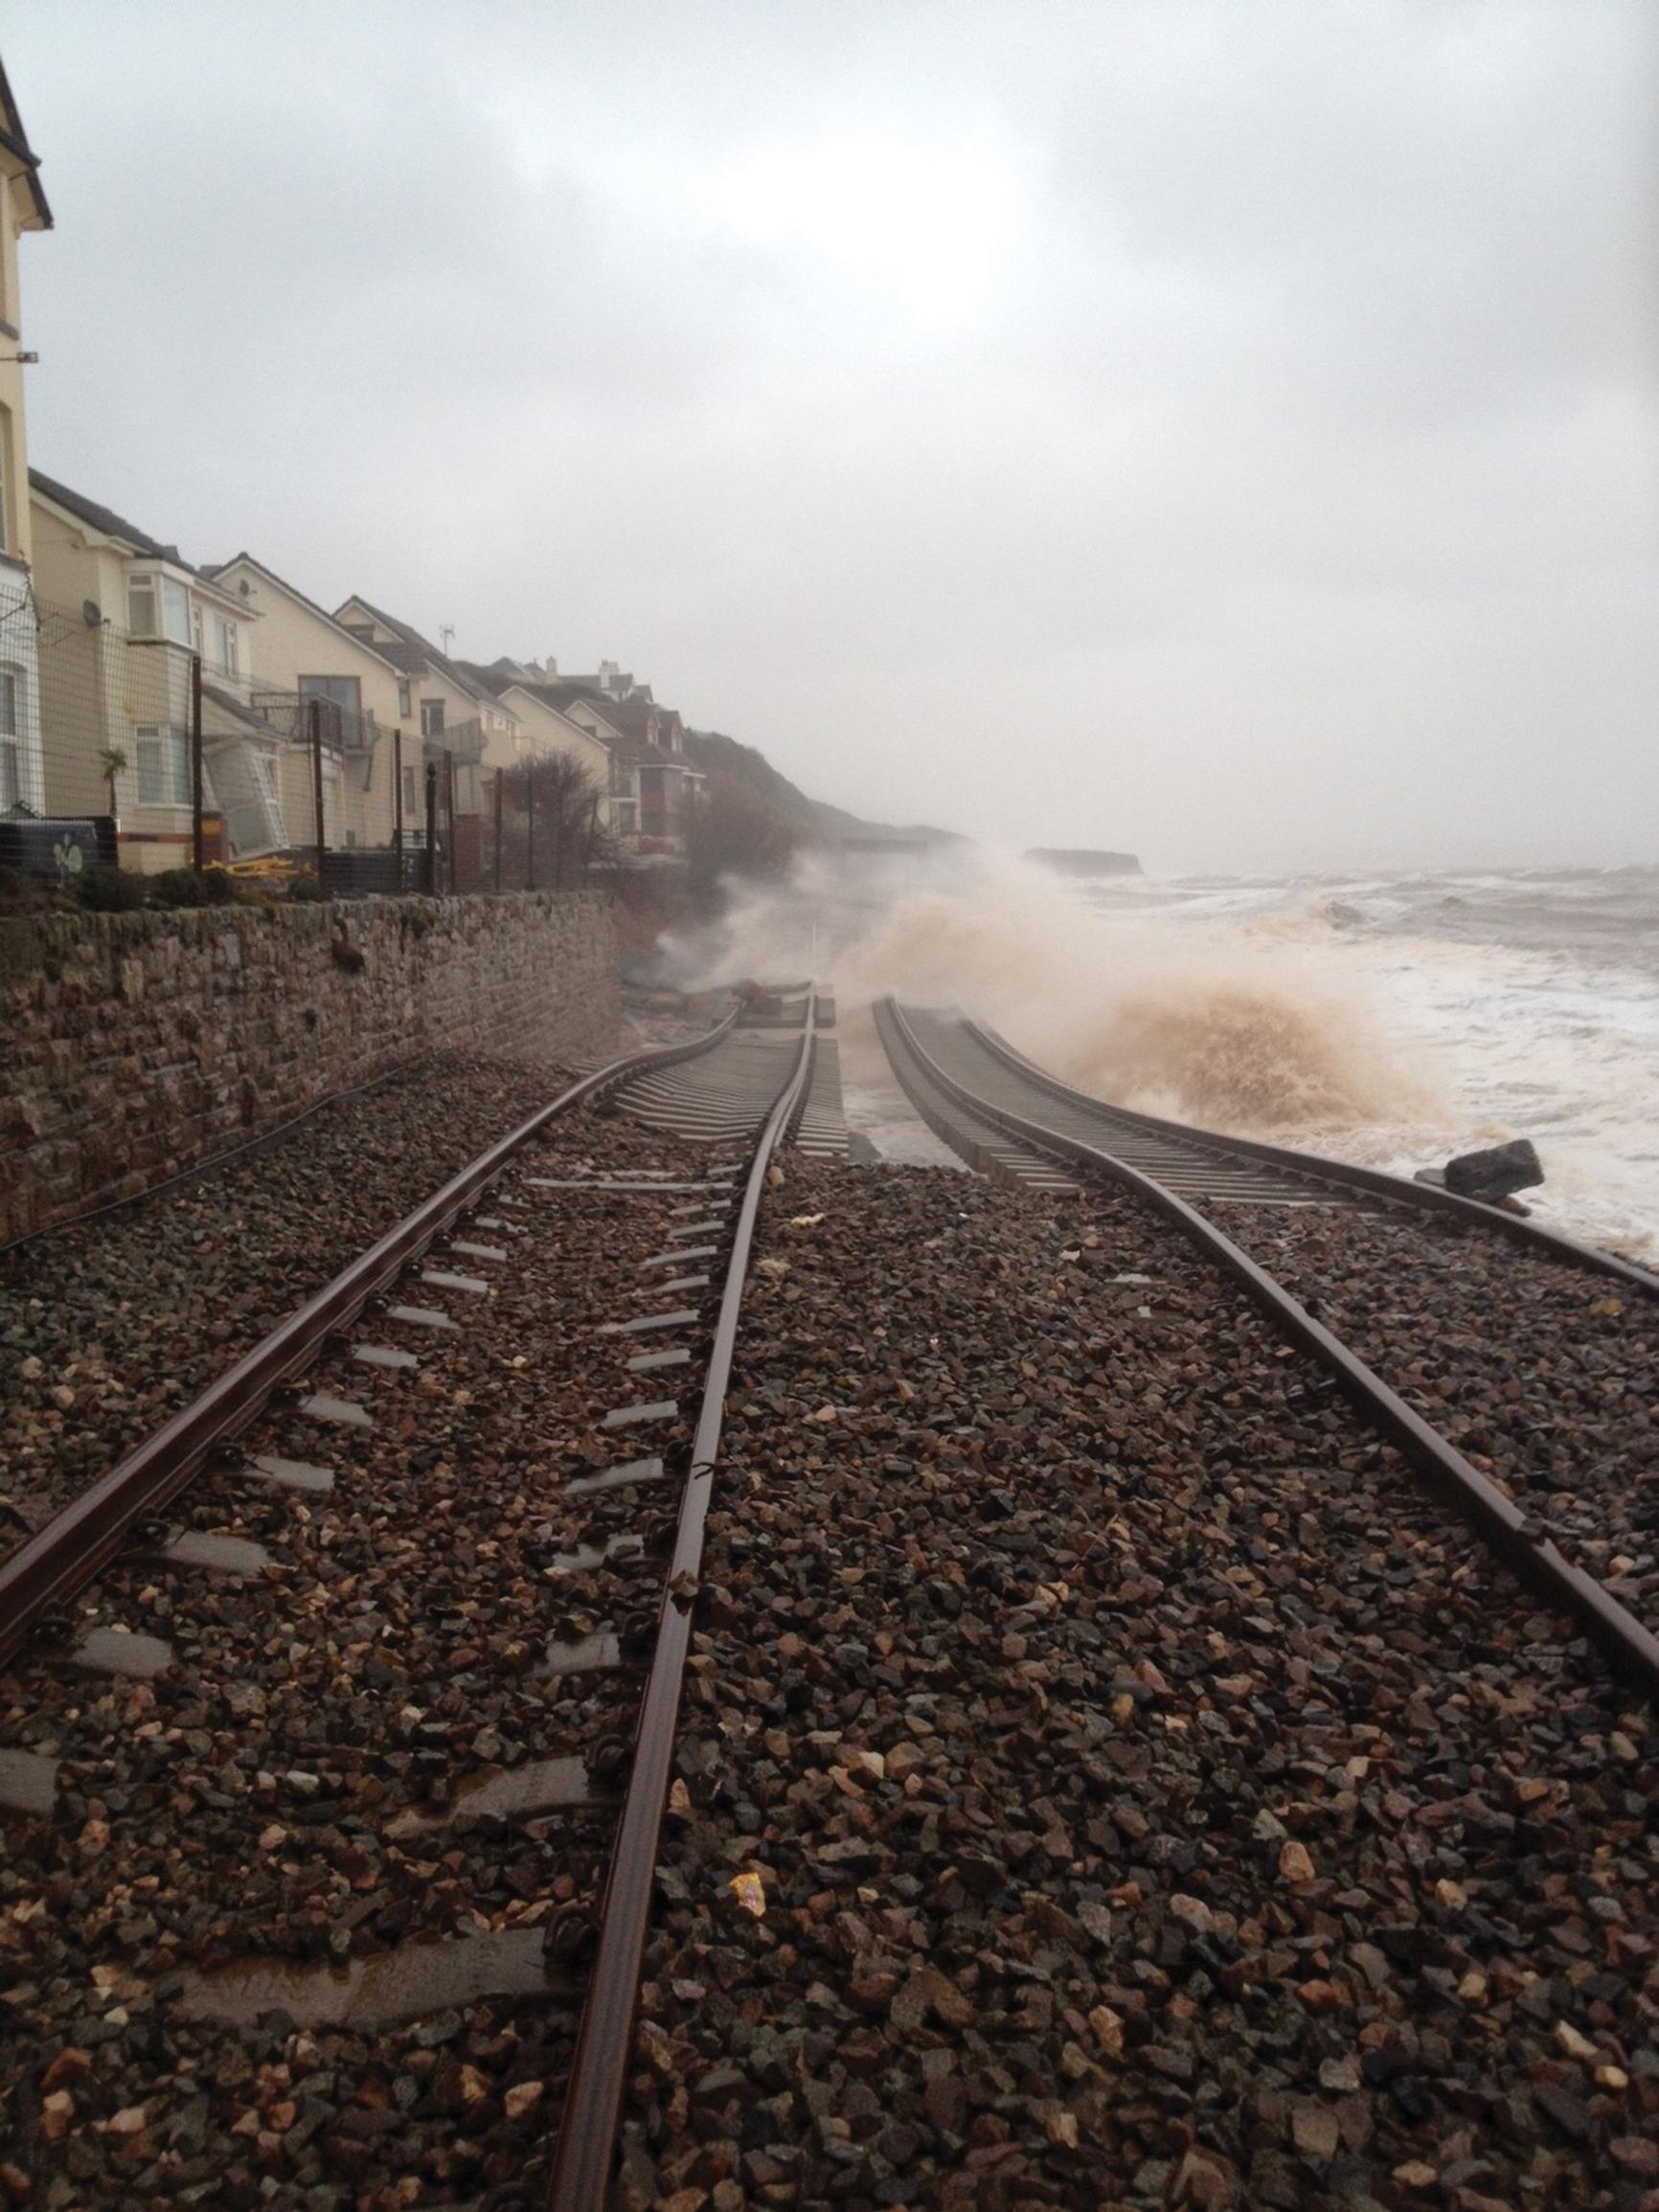 The collapse of a section of rail at Dawlish in Devon after floods could have been averted by satellite technology, which would have detected that the embankment was moving, allowing pre-emptive action